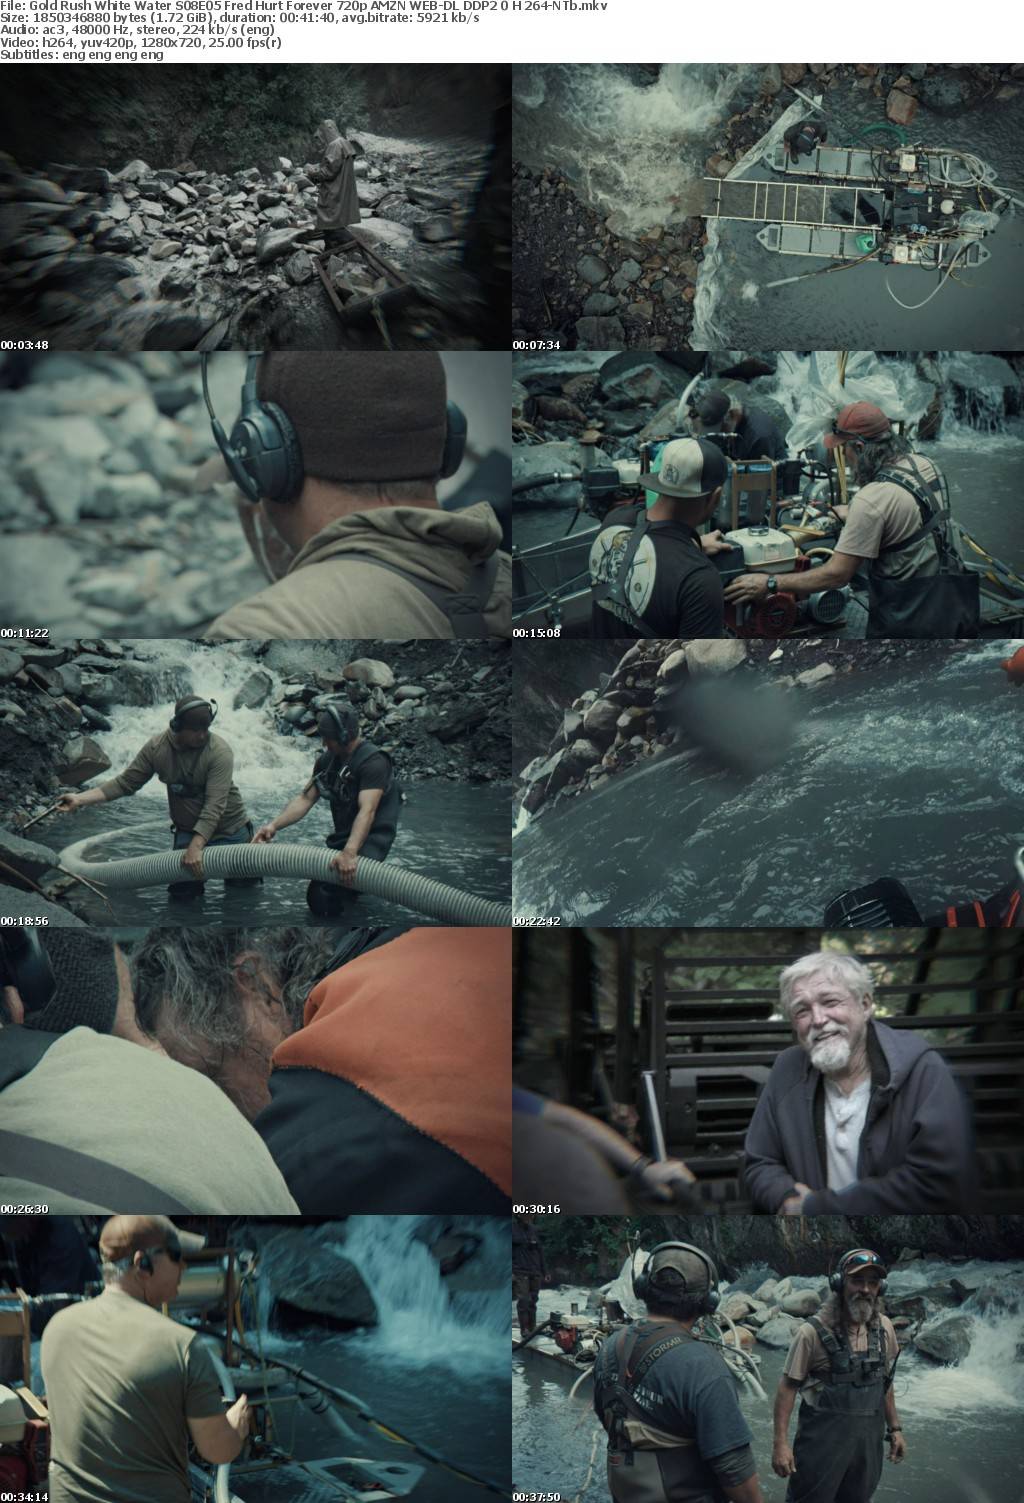 Gold Rush White Water S08E05 Fred Hurt Forever 720p AMZN WEB-DL DDP2 0 H 264-NTb